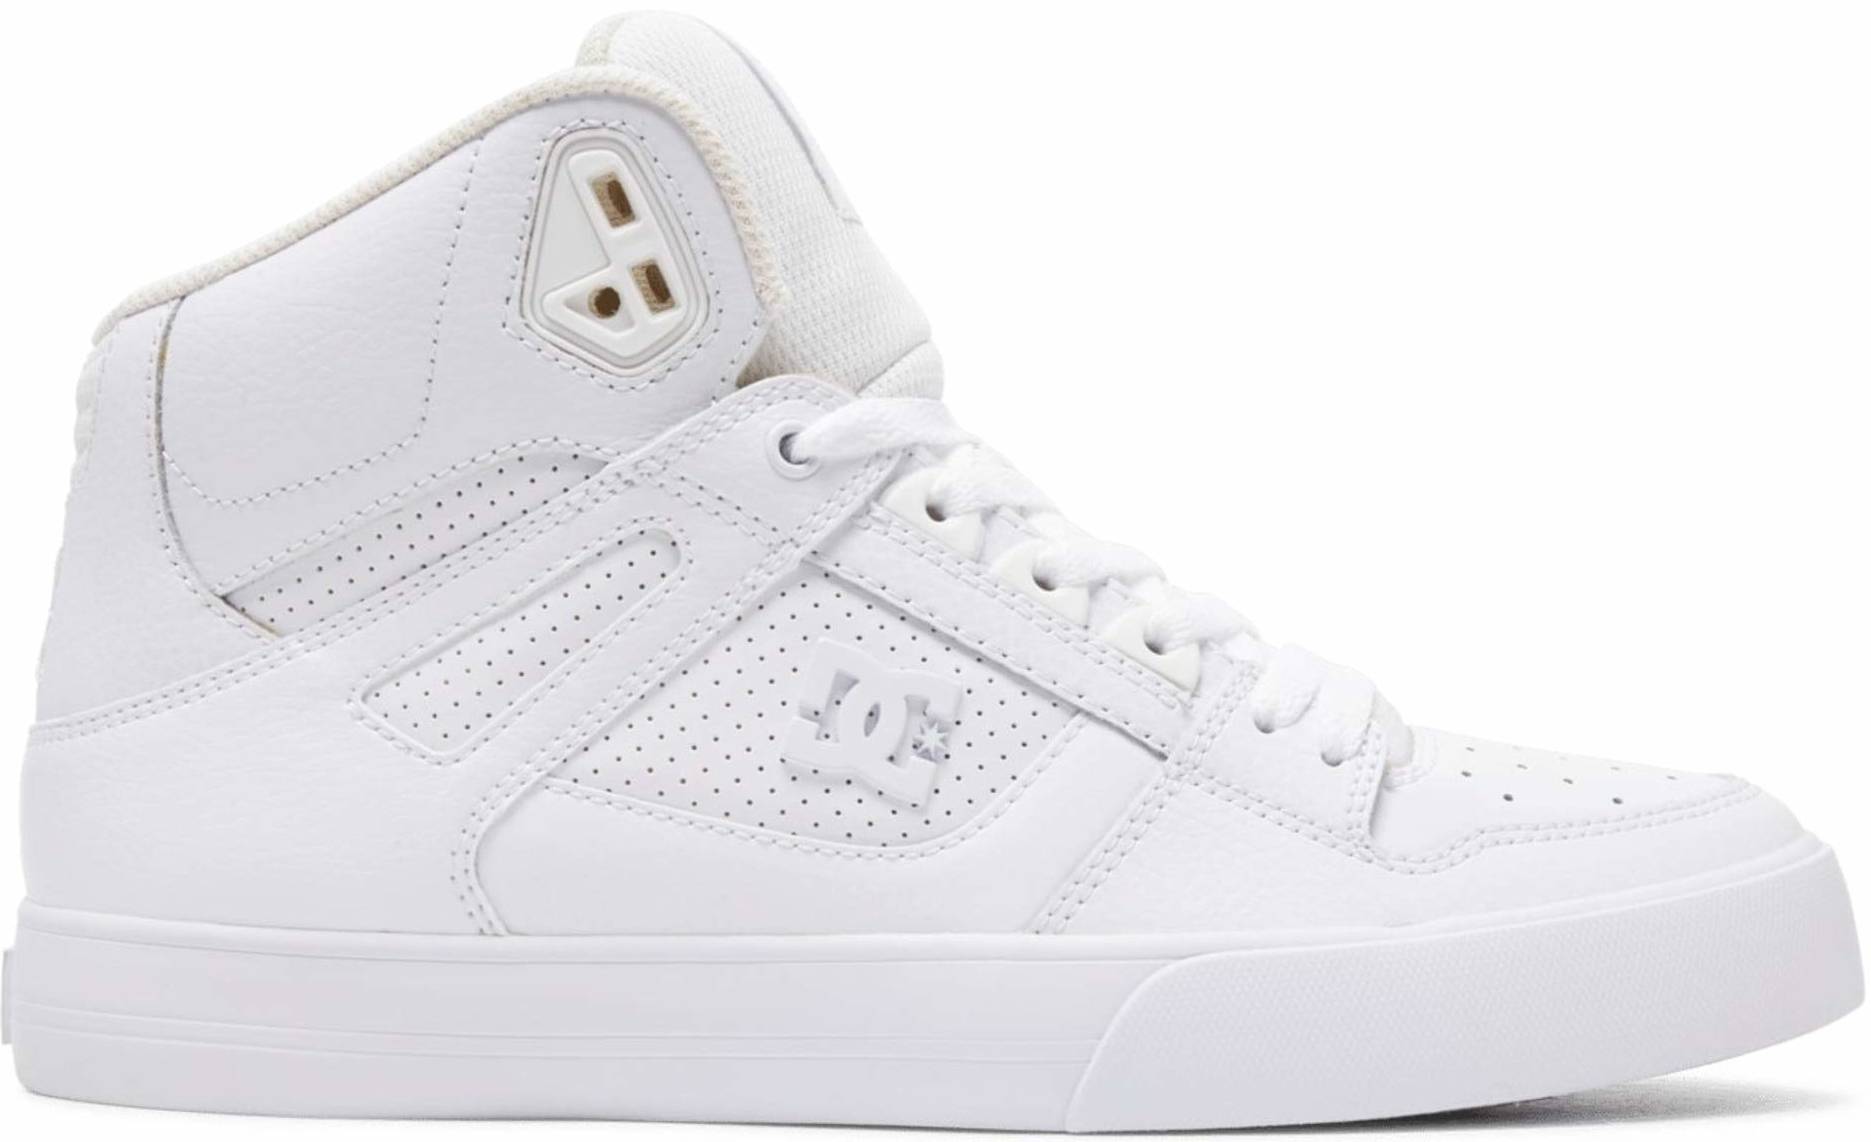 Save 31% on White High Top Sneakers (51 